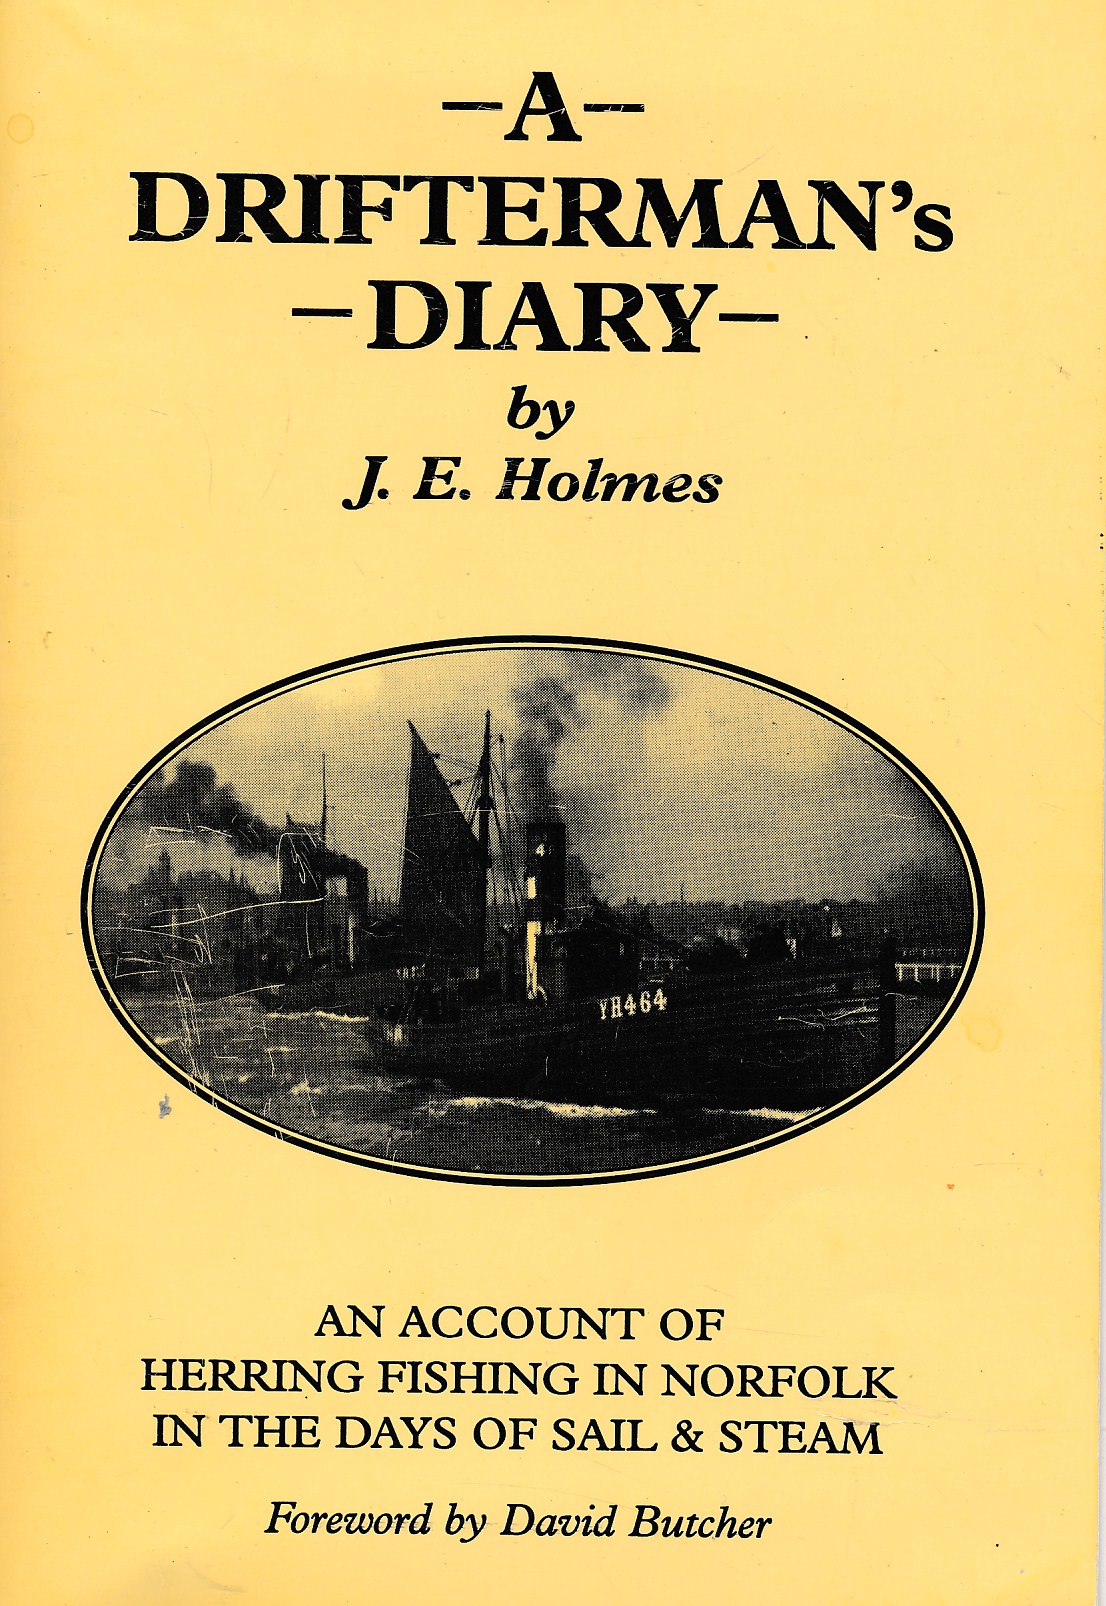 A Drifterman's Diary. An Account of Herring Fishing in Norfolk in the Days of Sail & Steam. Signed copy.